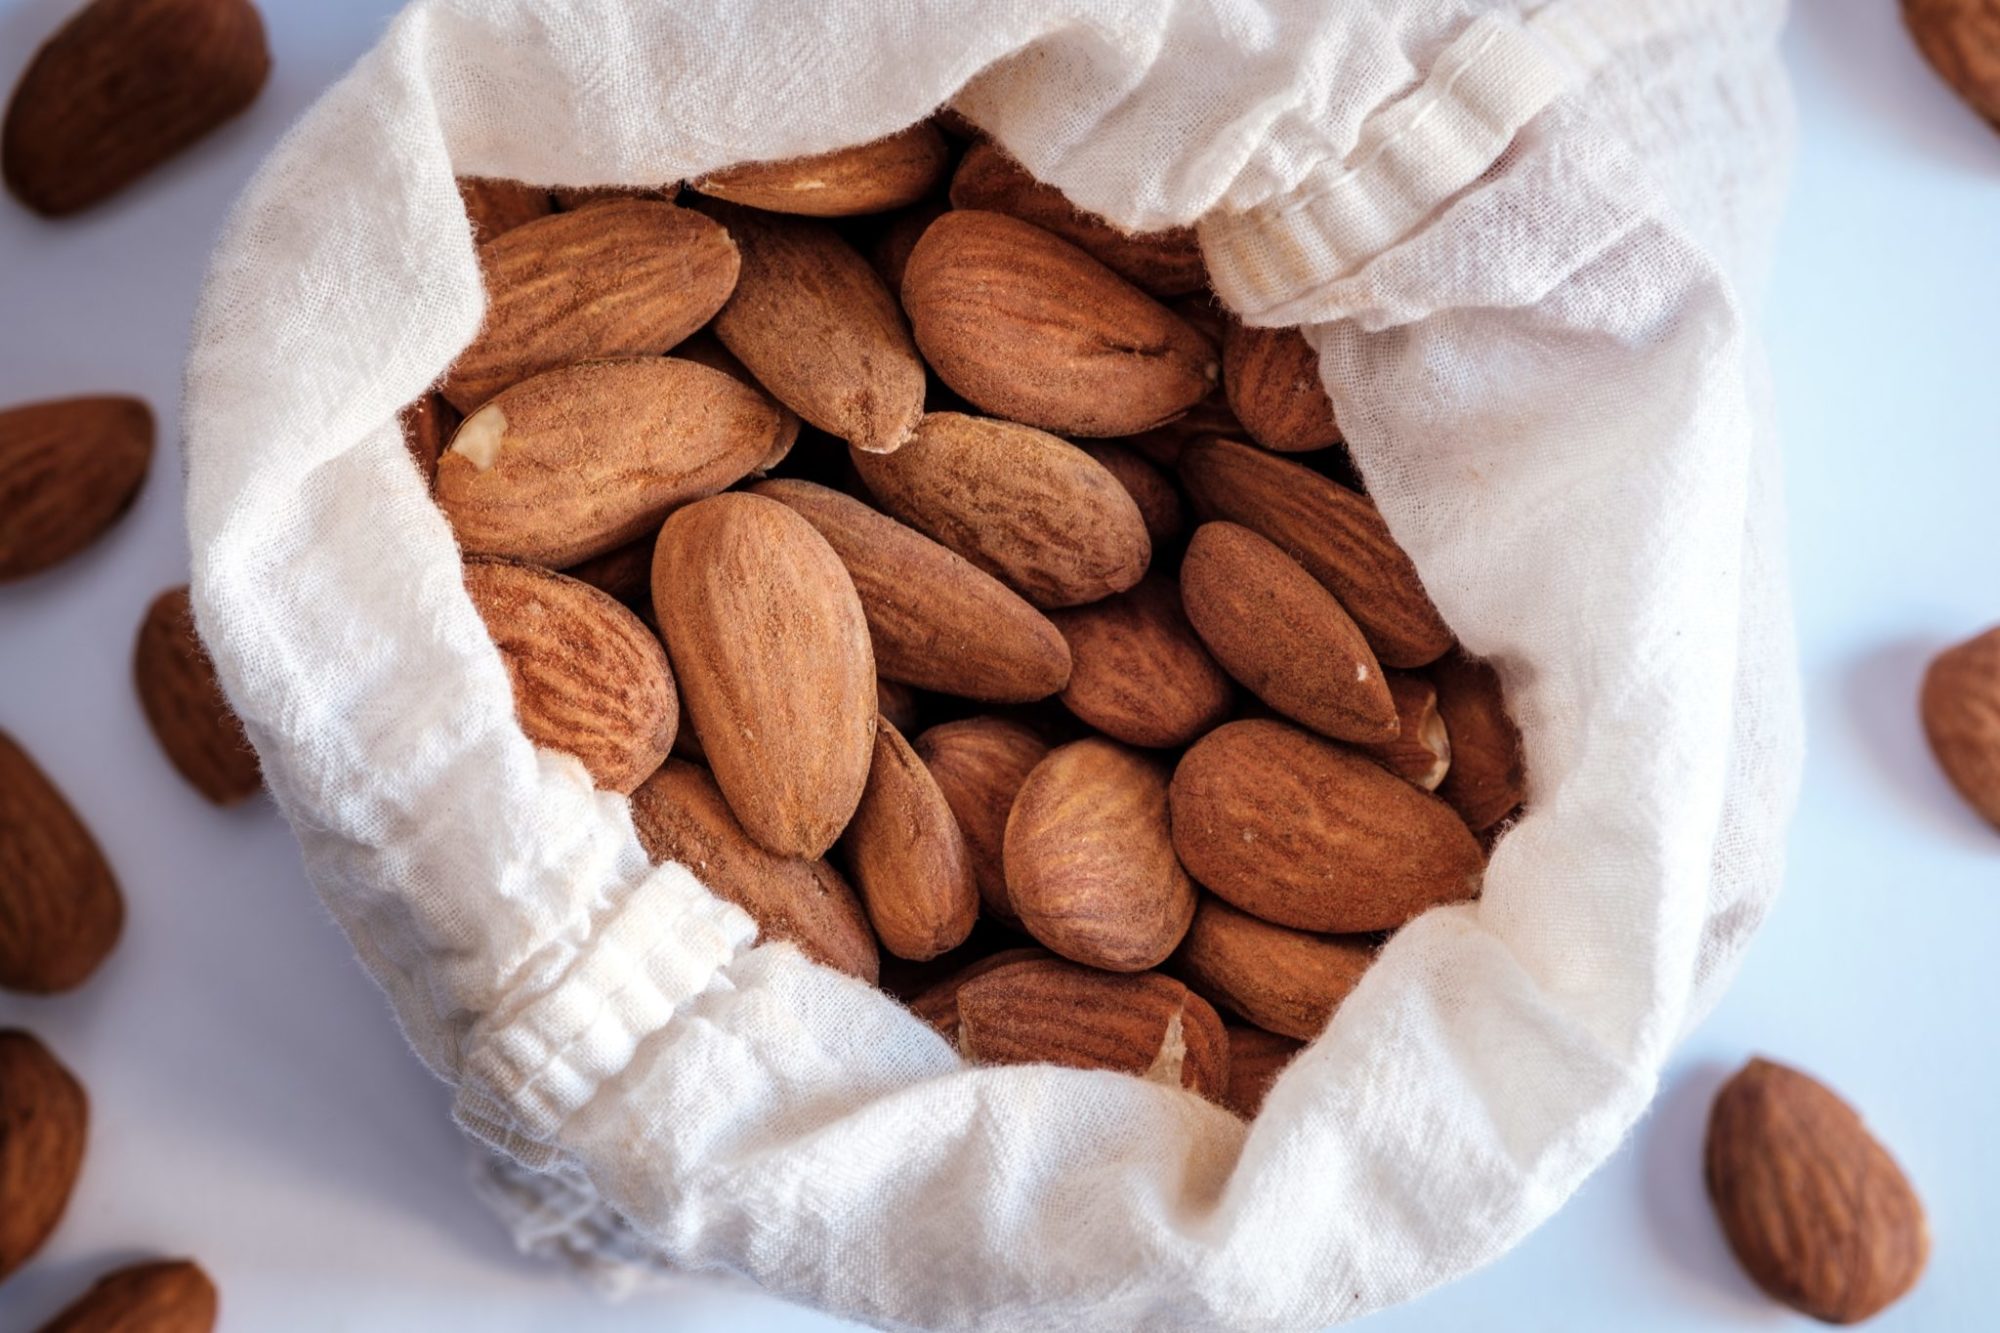 Raw almonds in a white bag